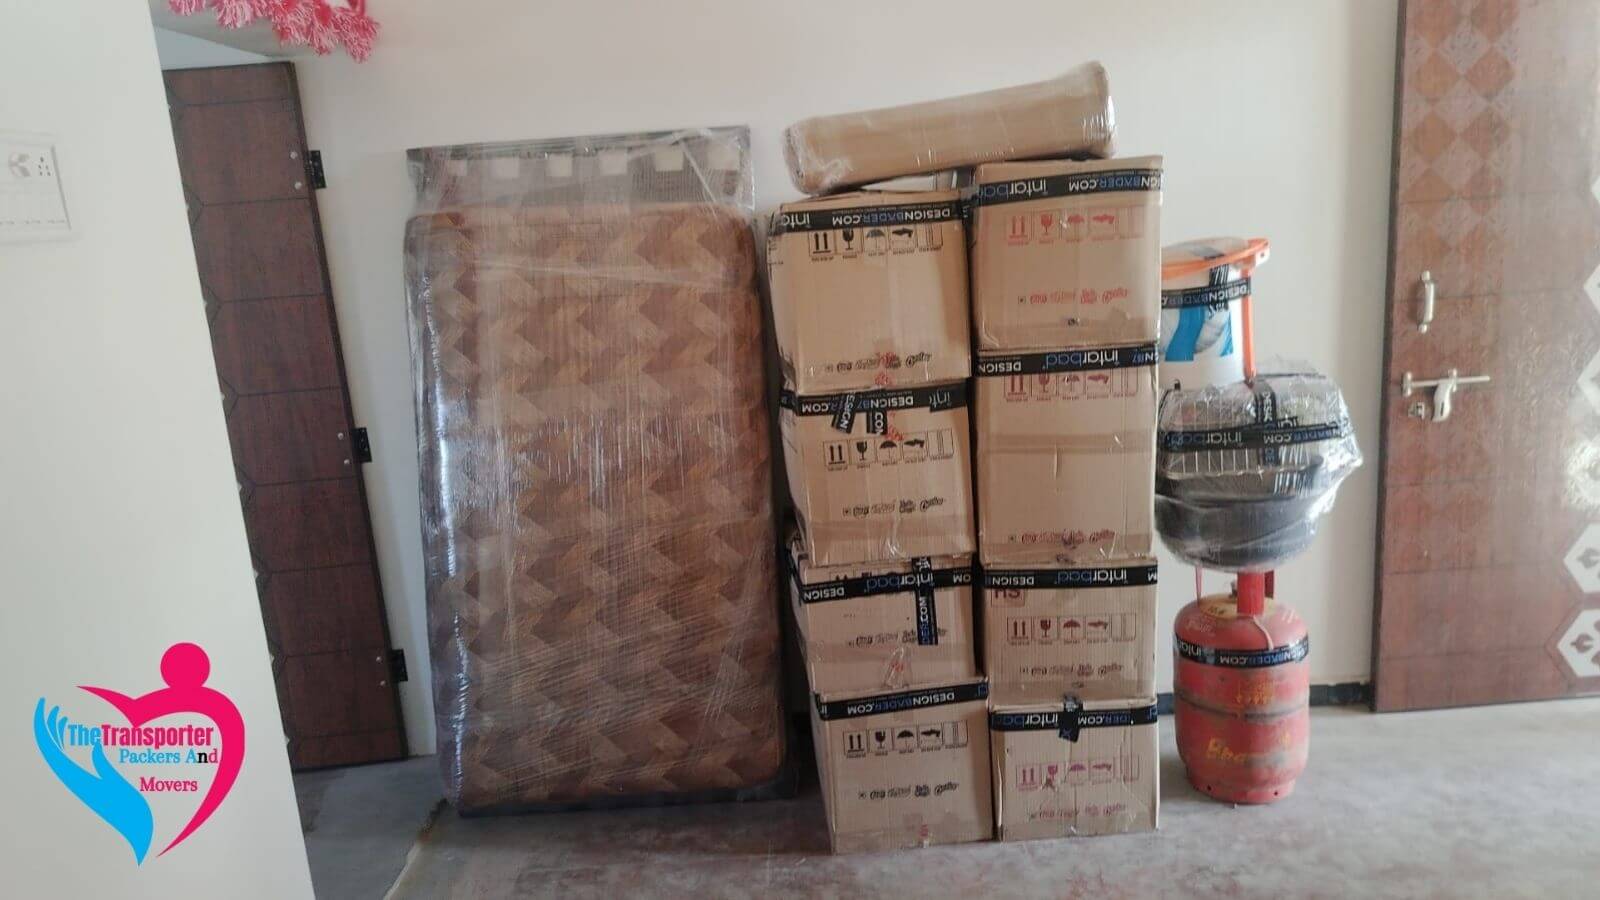 TheTransporter Packers and Movers in Faridabad - Our Commitment to You